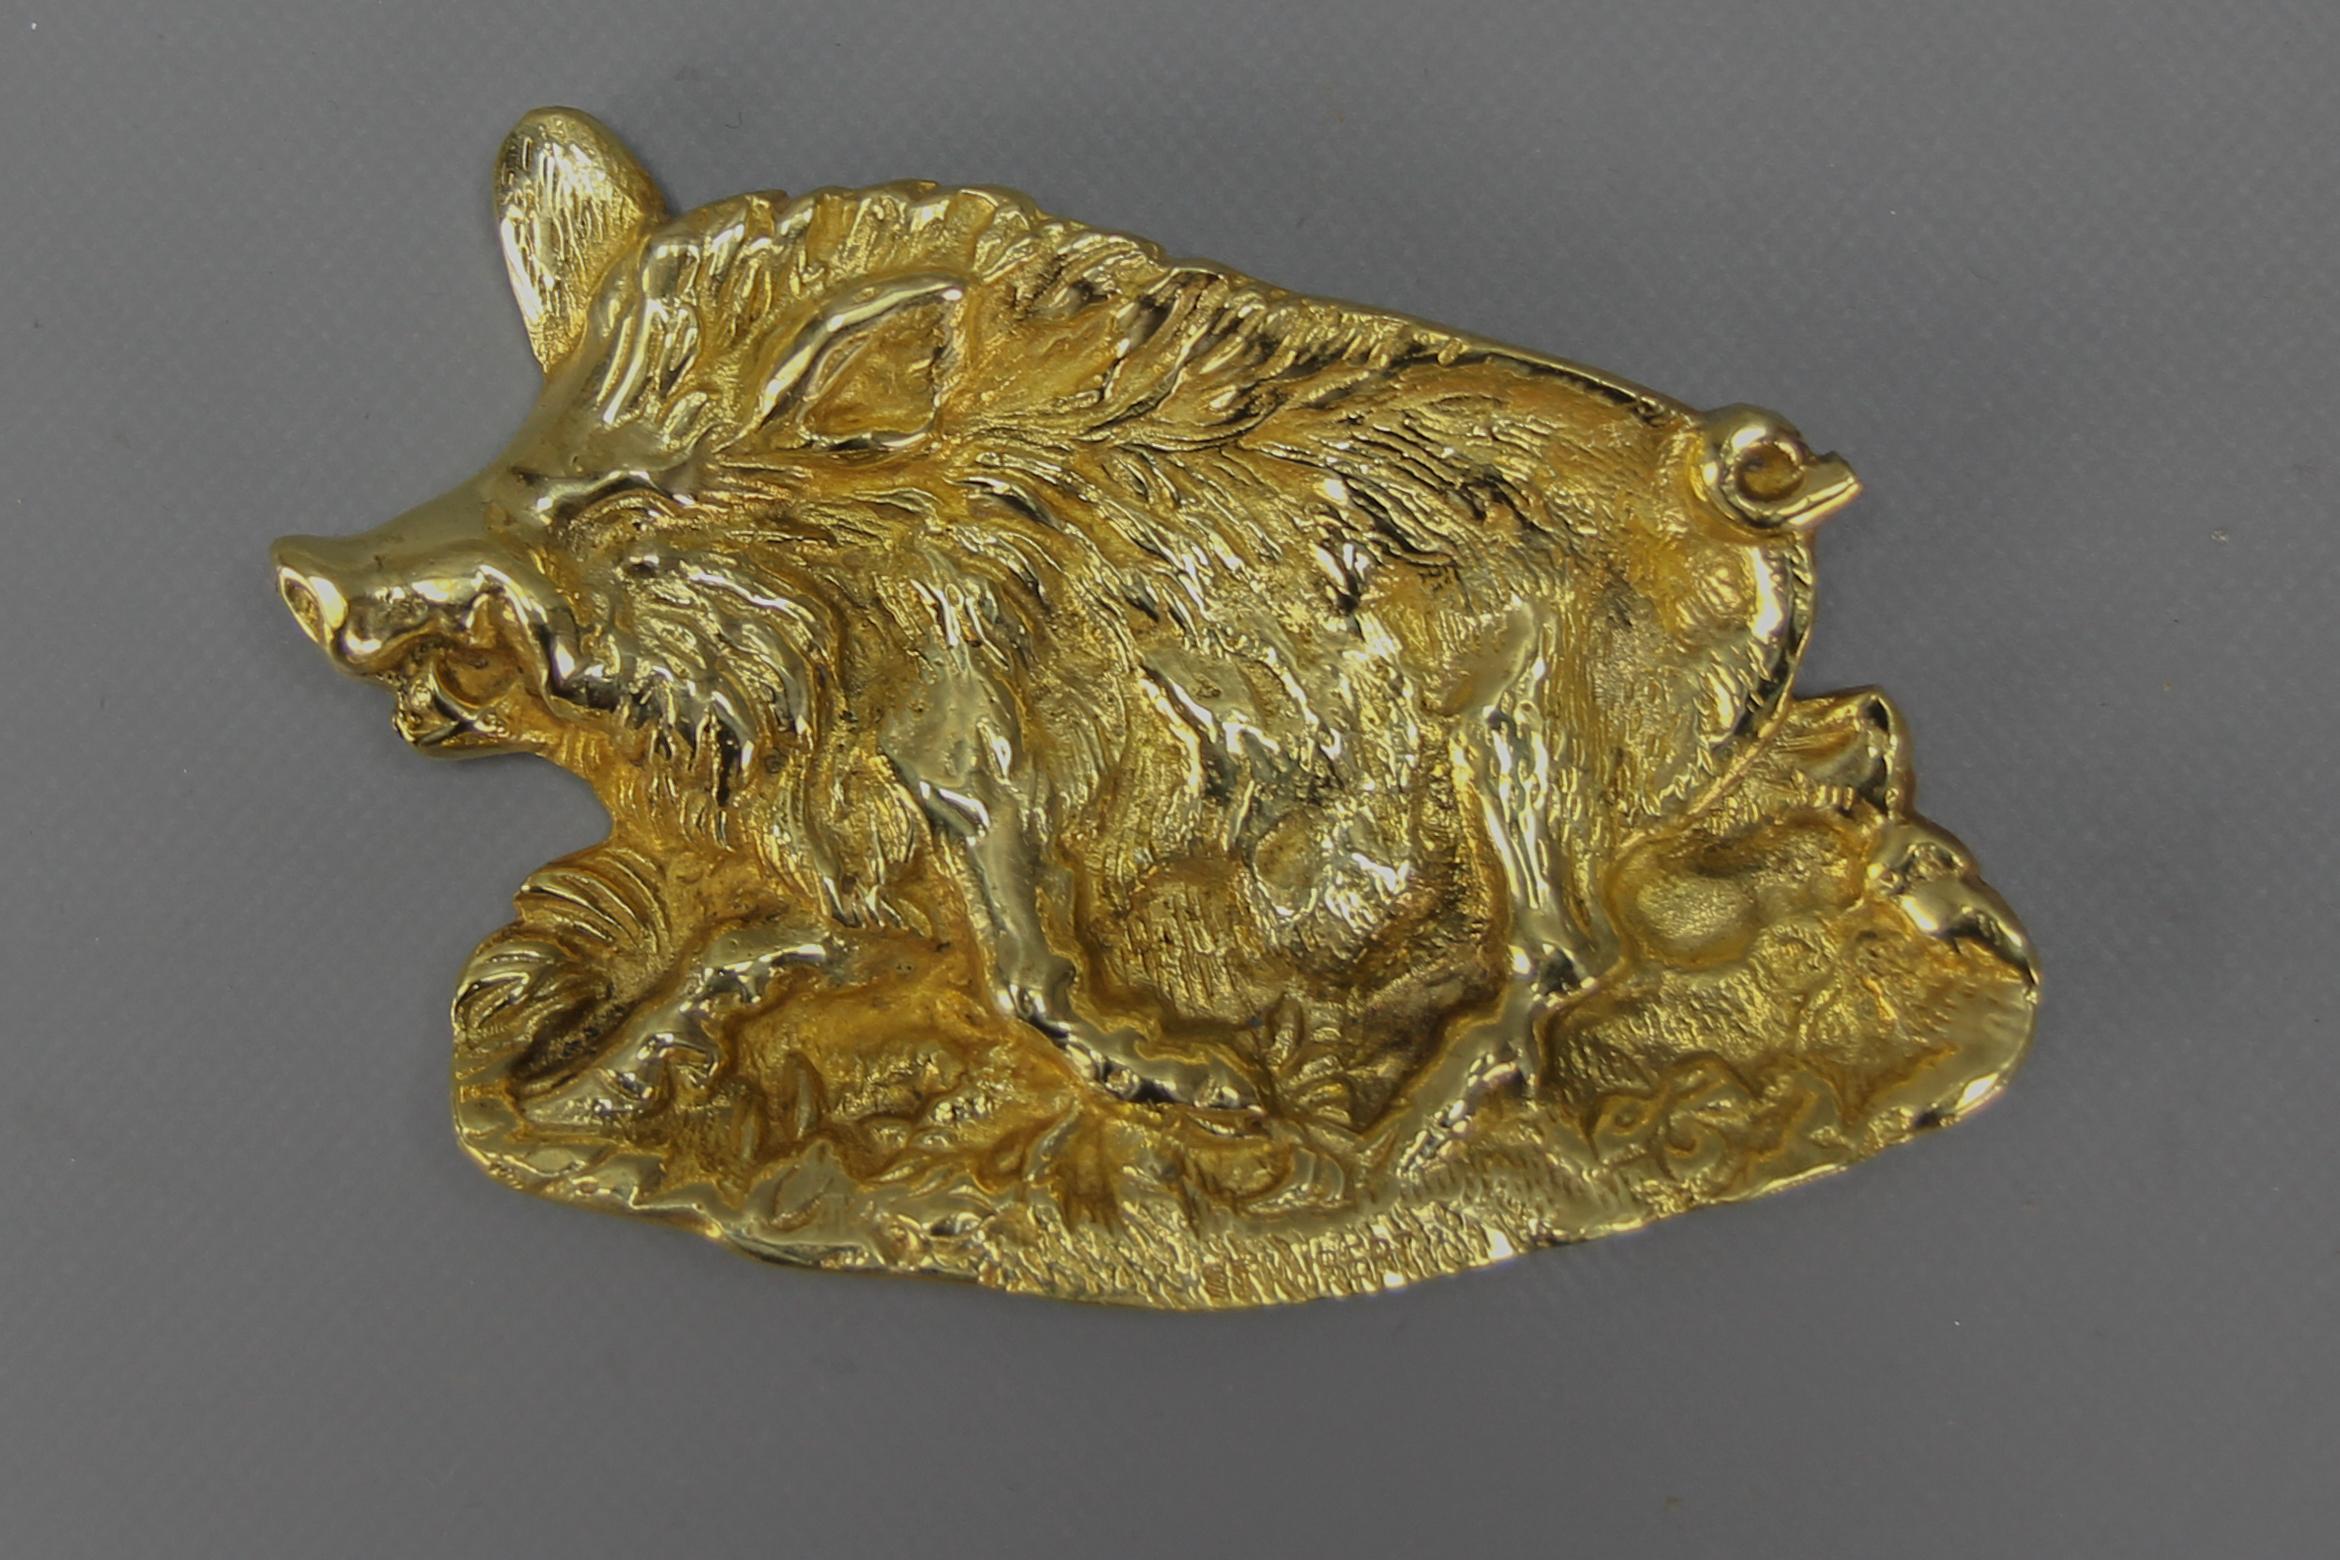 French Bronze Card Tray or Pin Tray, Vide-Poche in a Shape of a Wild Boar
This adorable card tray or pin tray, Vide - Poche, is made of bronze in the shape of a running wild boar. France, circa the 1930s. 
Signed at the bottom but illegible.
Can be